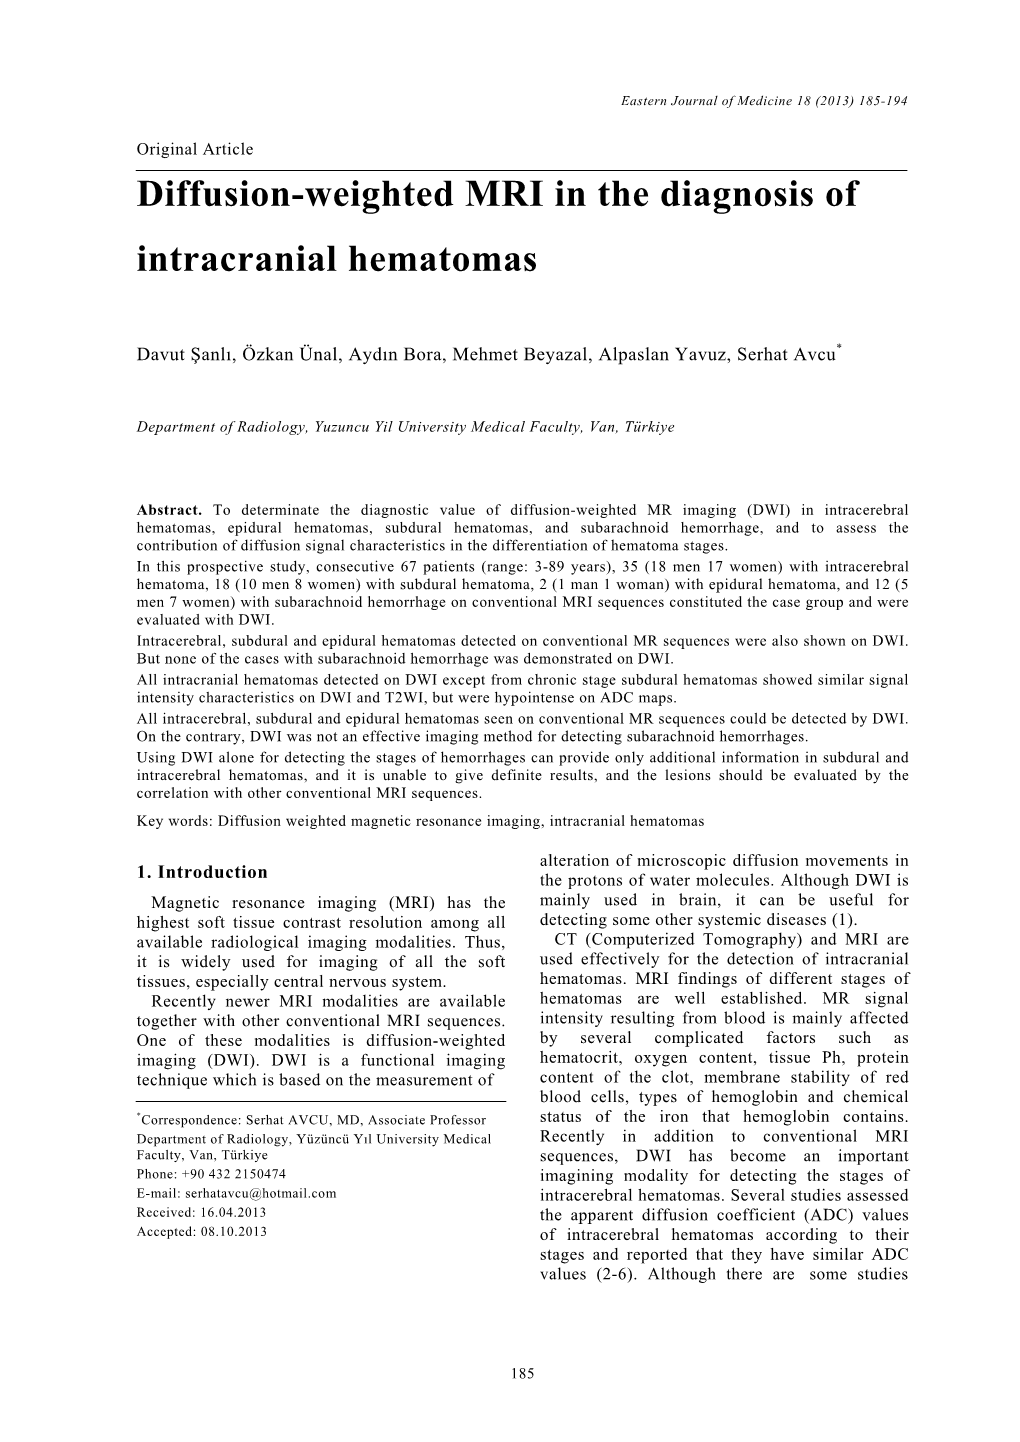 Diffusion-Weighted MRI in the Diagnosis of Intracranial Hematomas